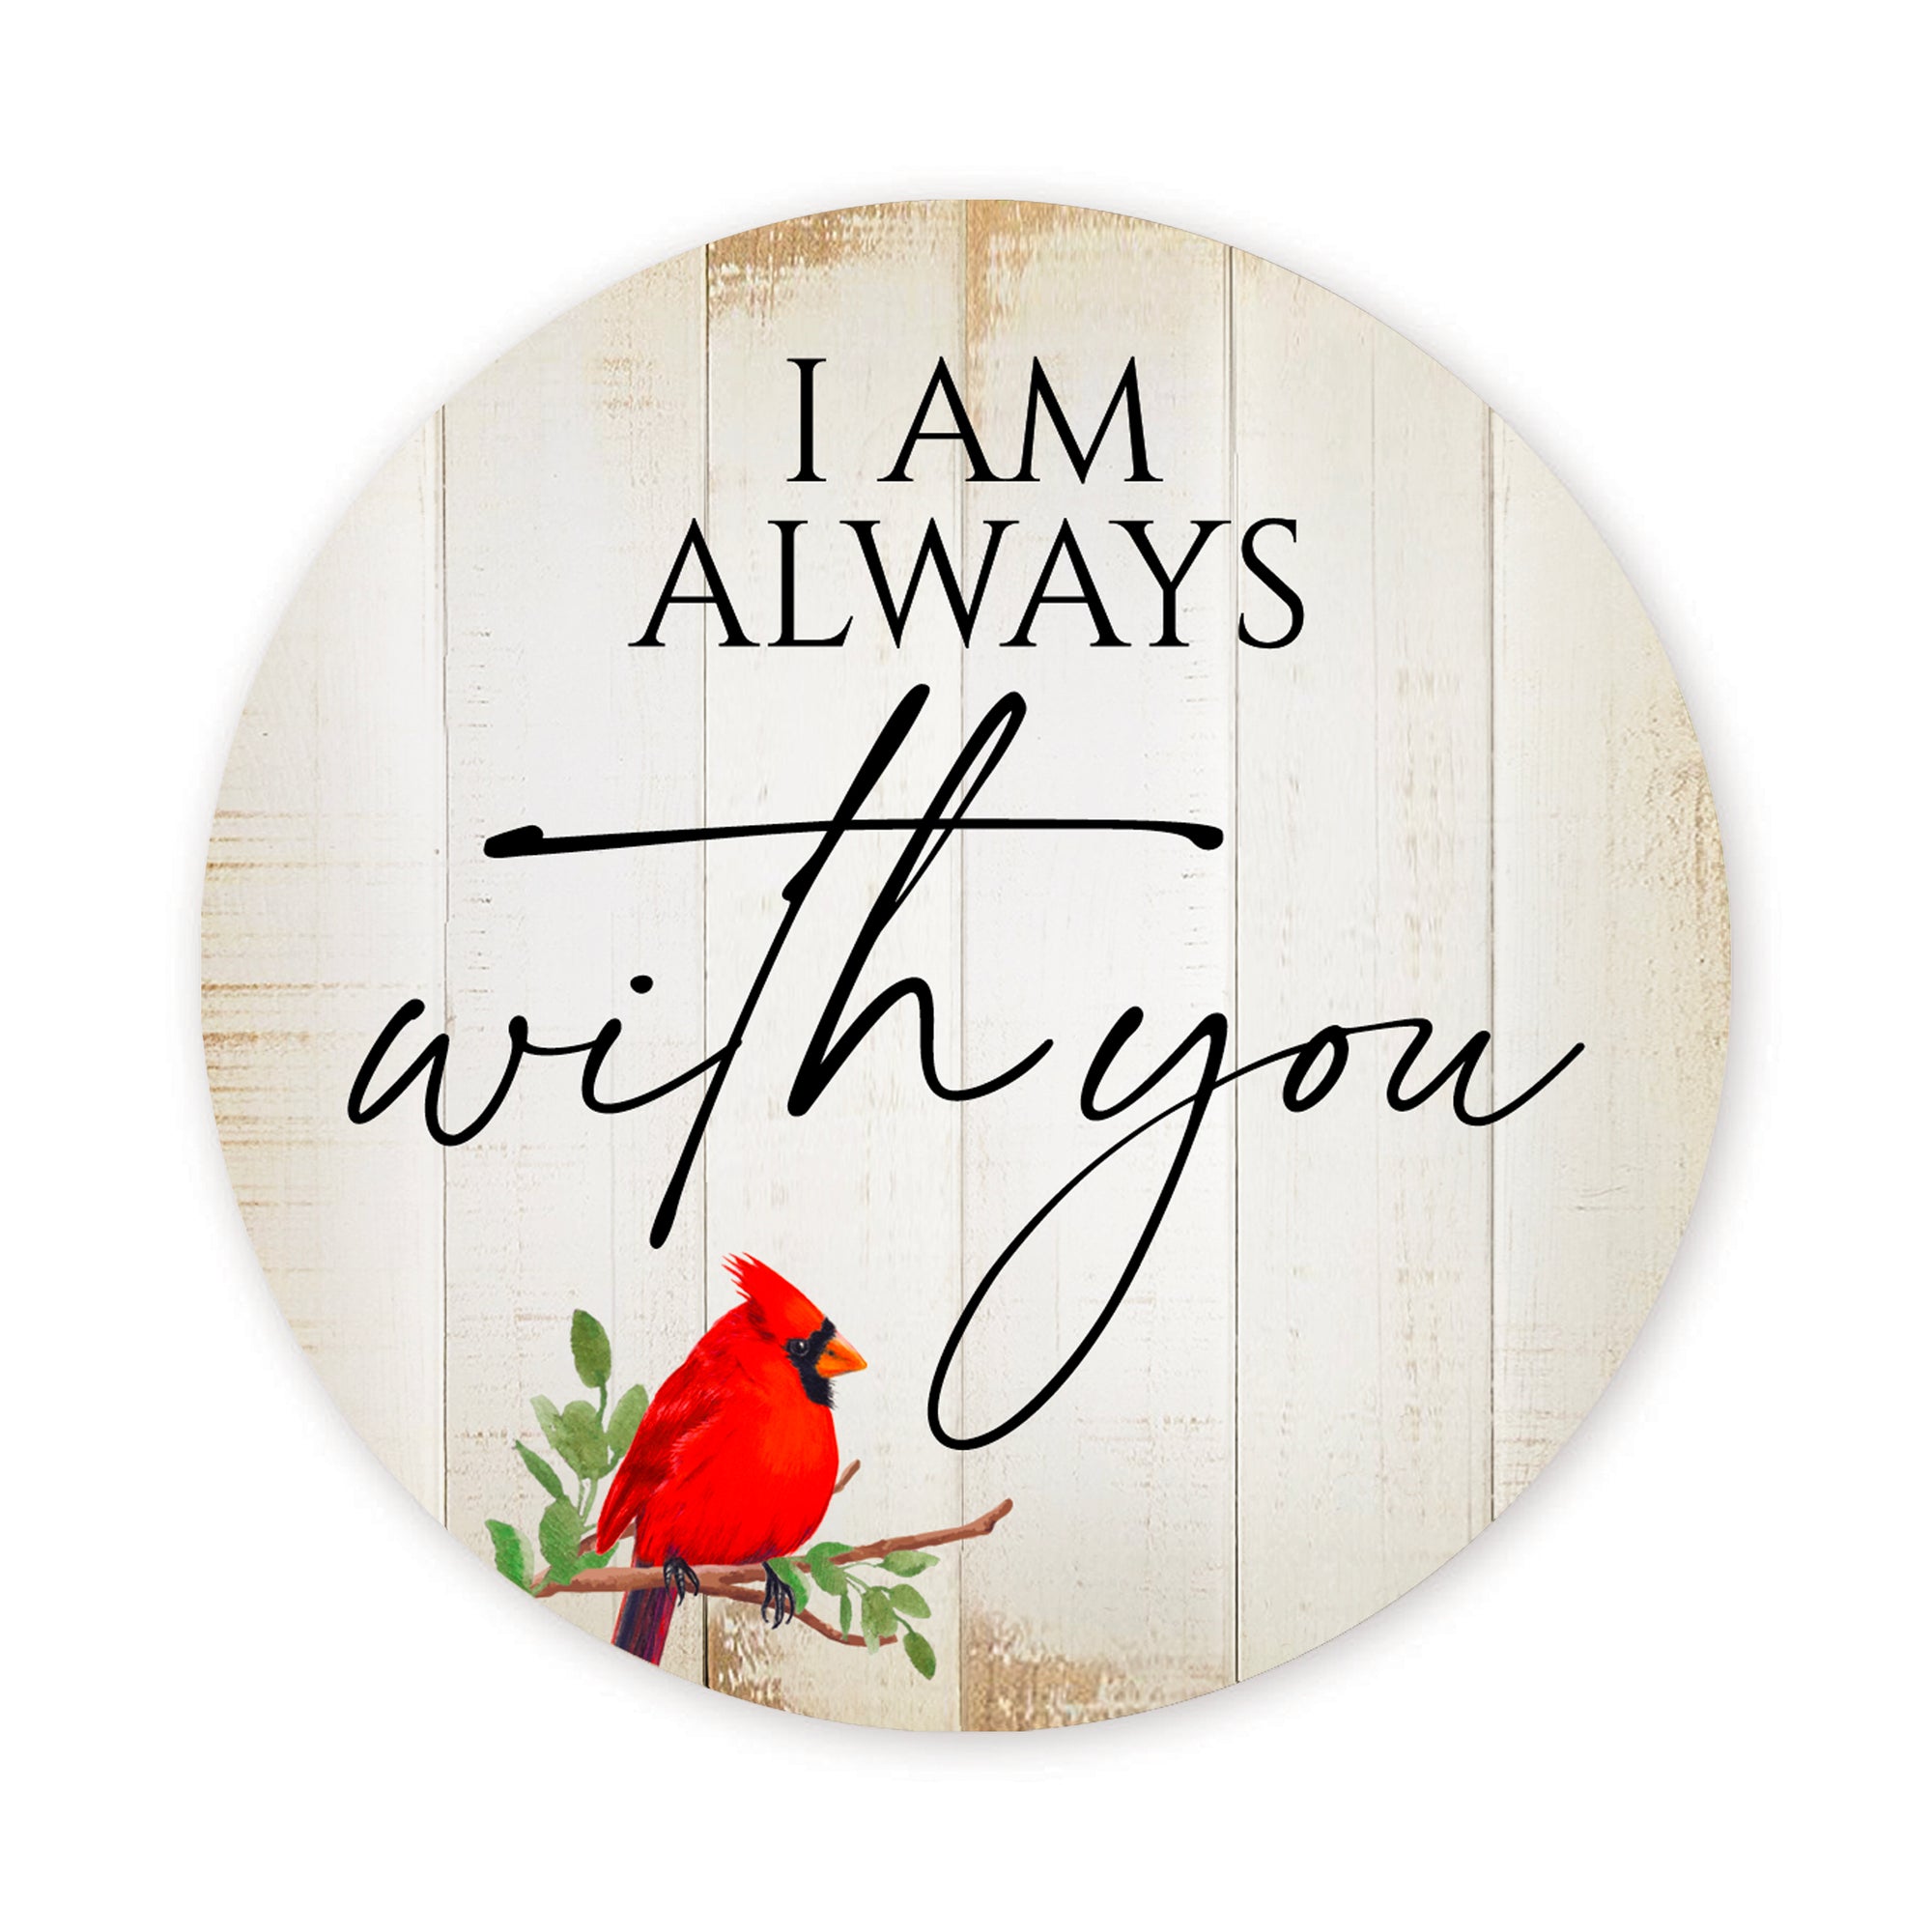 Vintage-Inspired Cardinal Wooden Magnet Printed With Everyday Inspirational Verses Gift Ideas - I Am Always